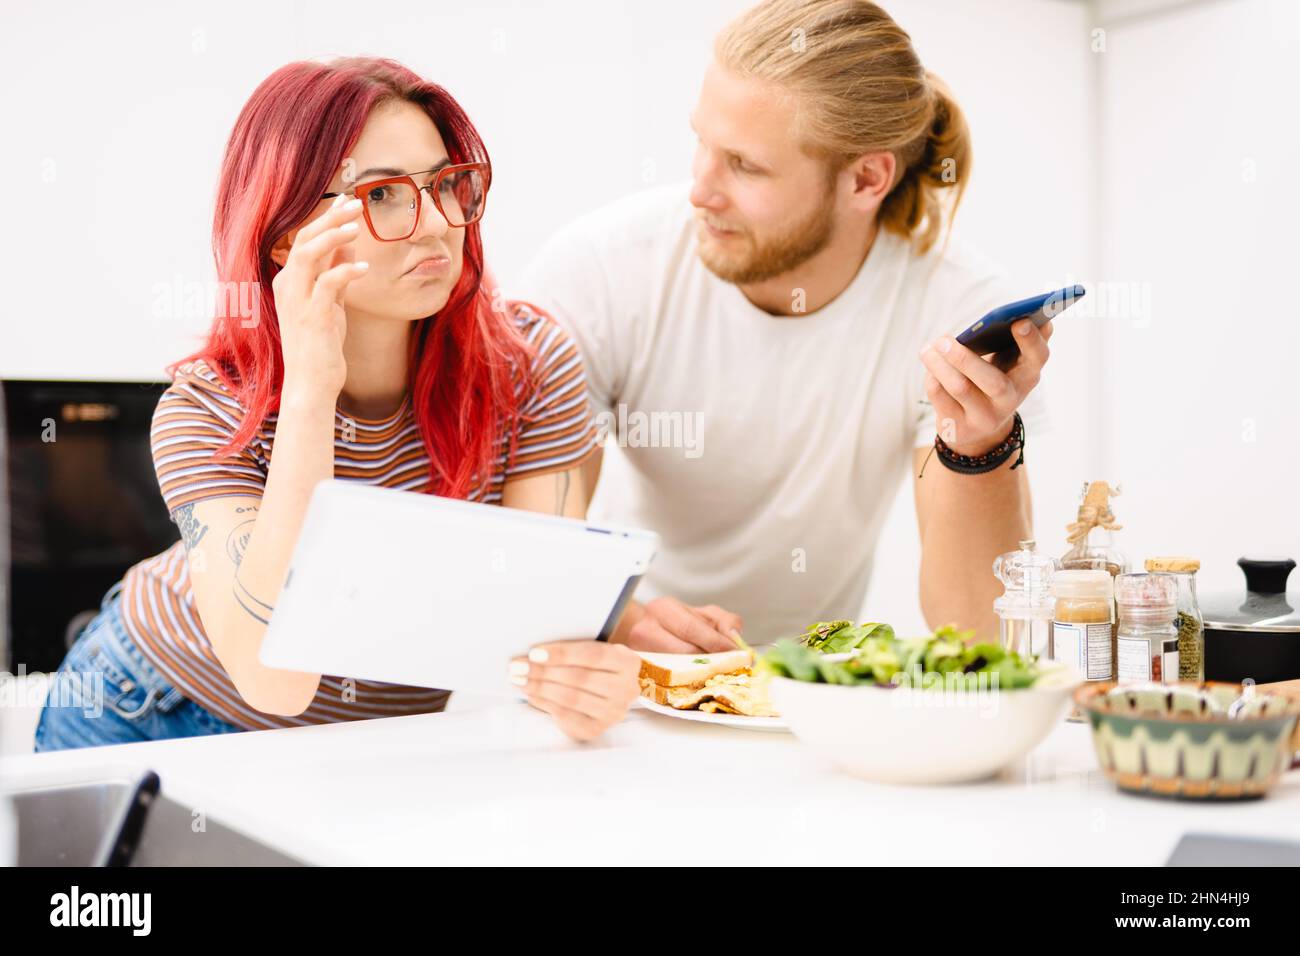 https://c8.alamy.com/comp/2HN4HJ9/young-white-couple-using-gadgets-while-having-lunch-in-kitchen-at-home-2HN4HJ9.jpg